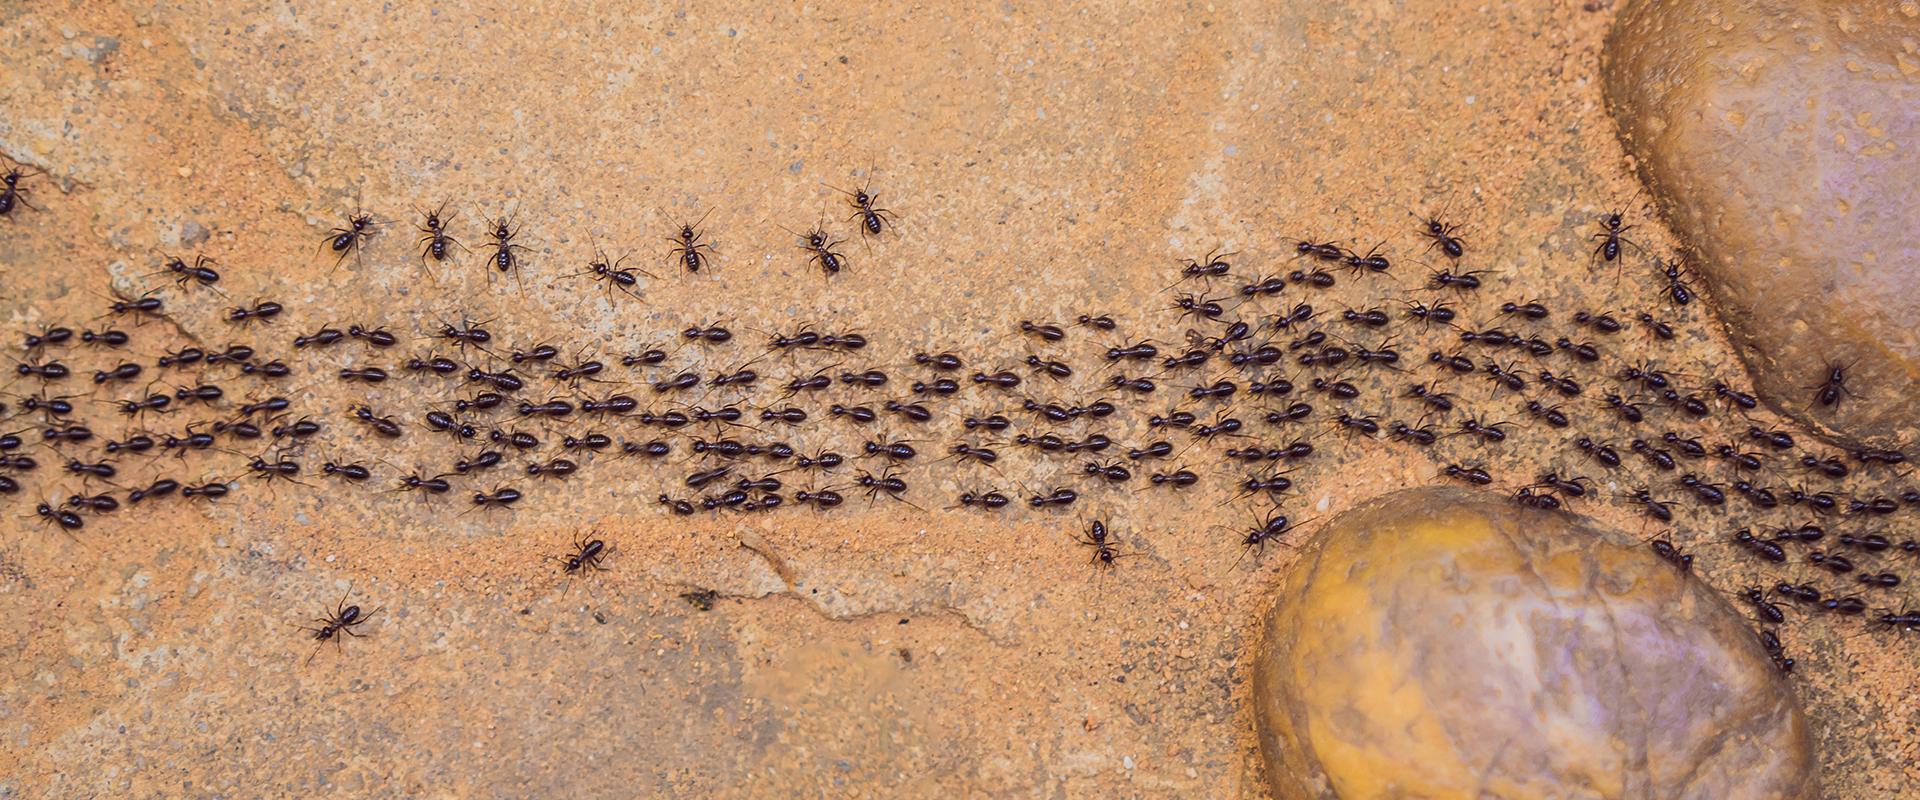 ants crawling on dirt in fayetteville georgia